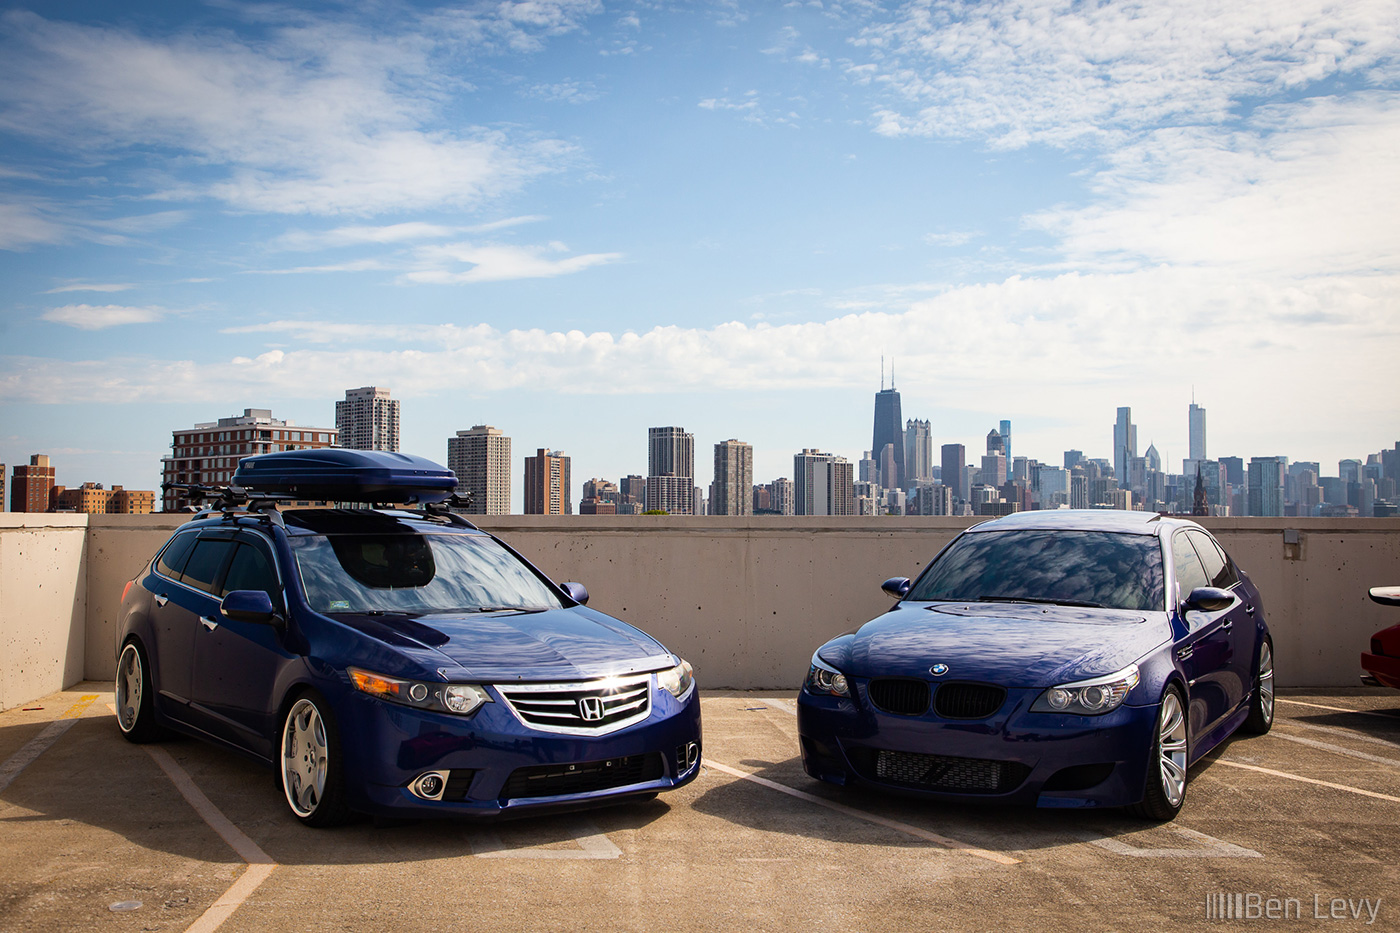 Blue Acura TSX and BMW M5 in Chicago